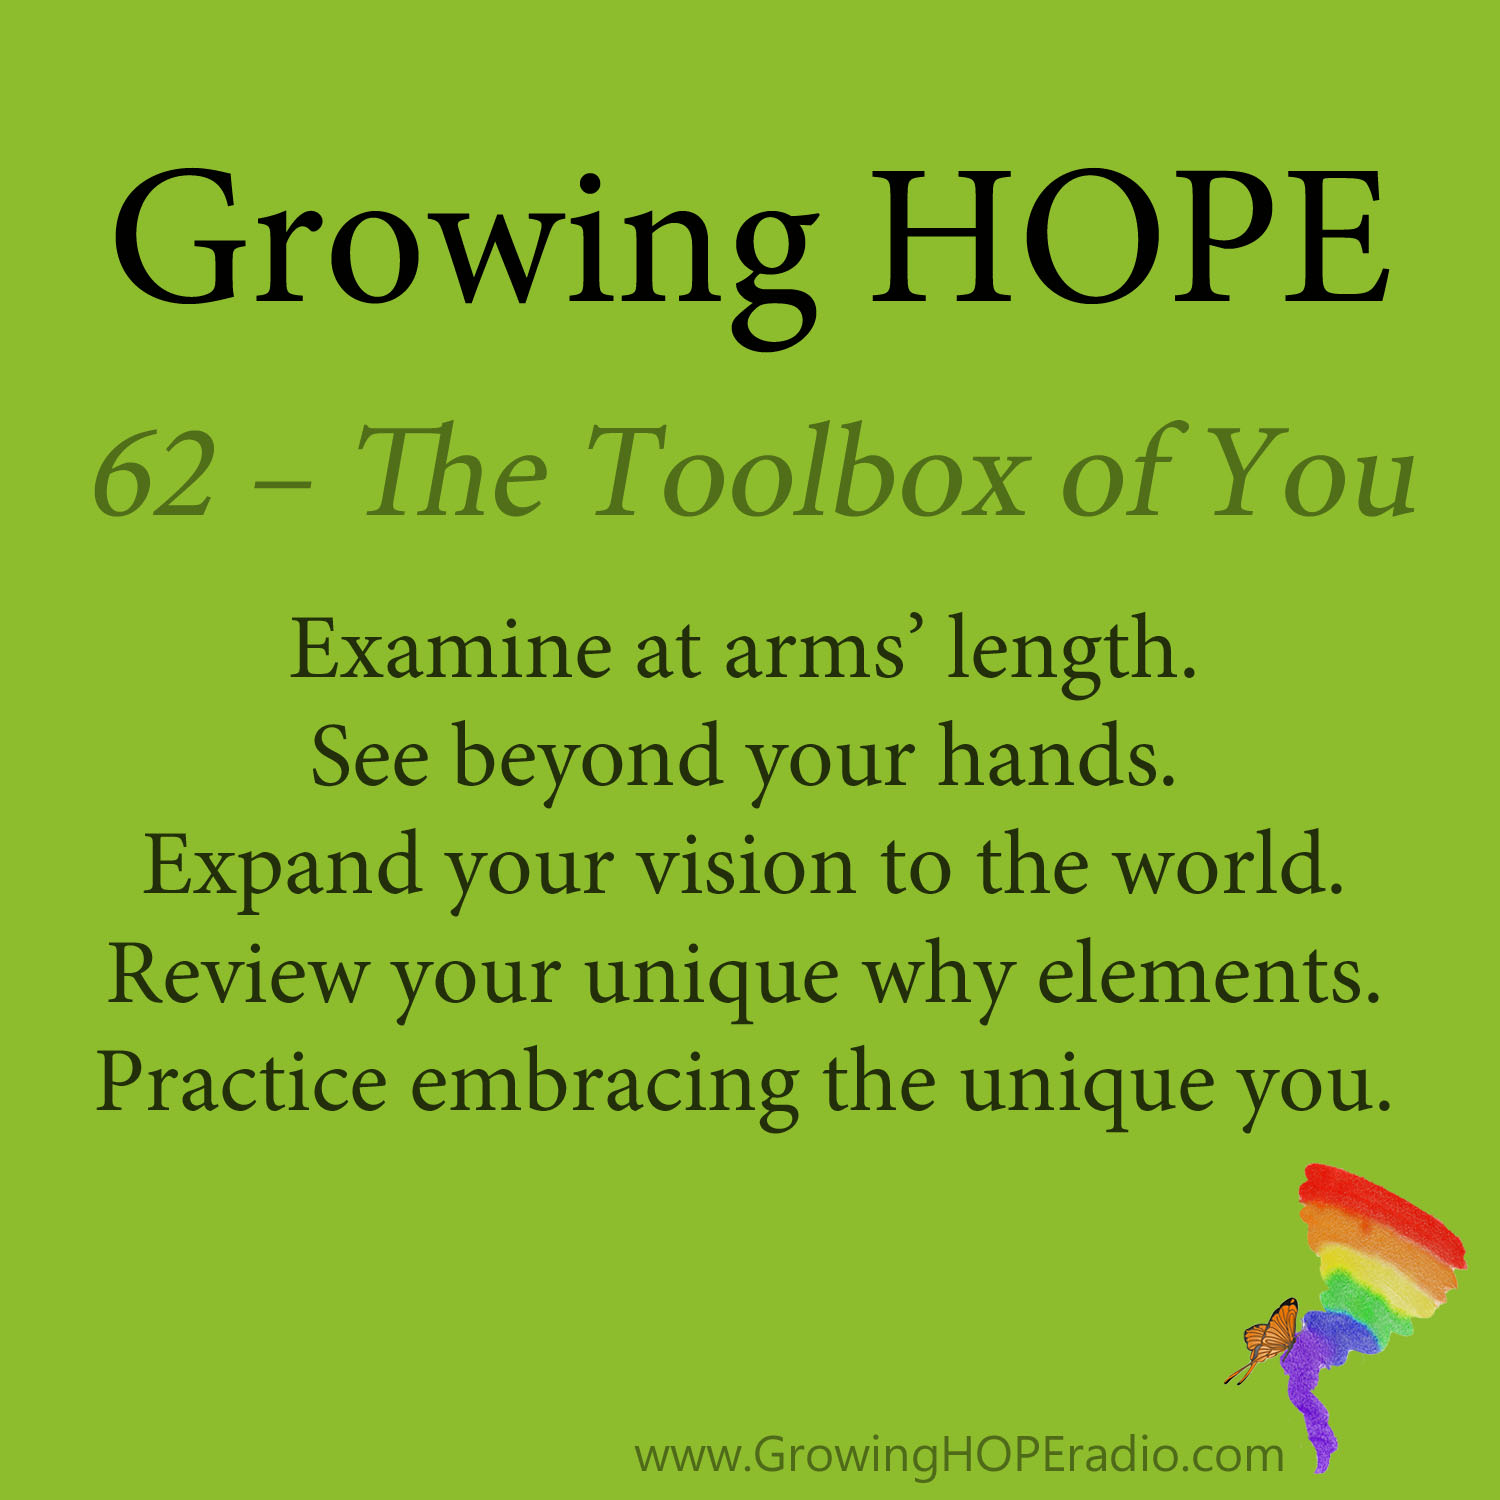 Growing HOPE Daily - 5 Points - Toolbox of You